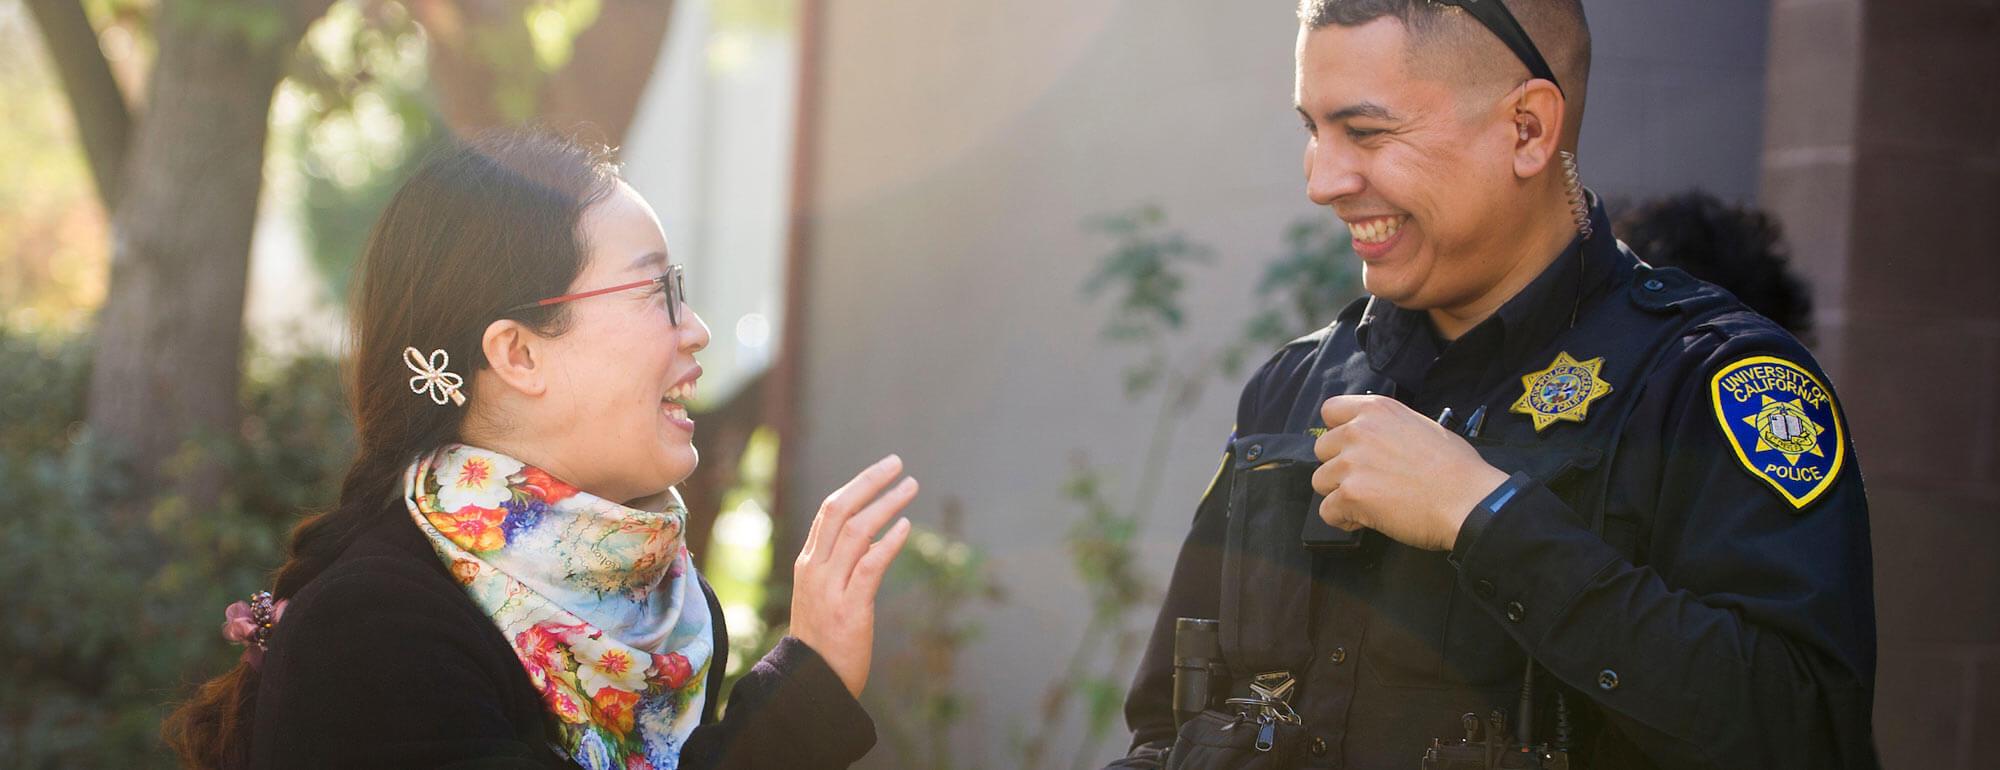 A campus police officer talks to one of our professors